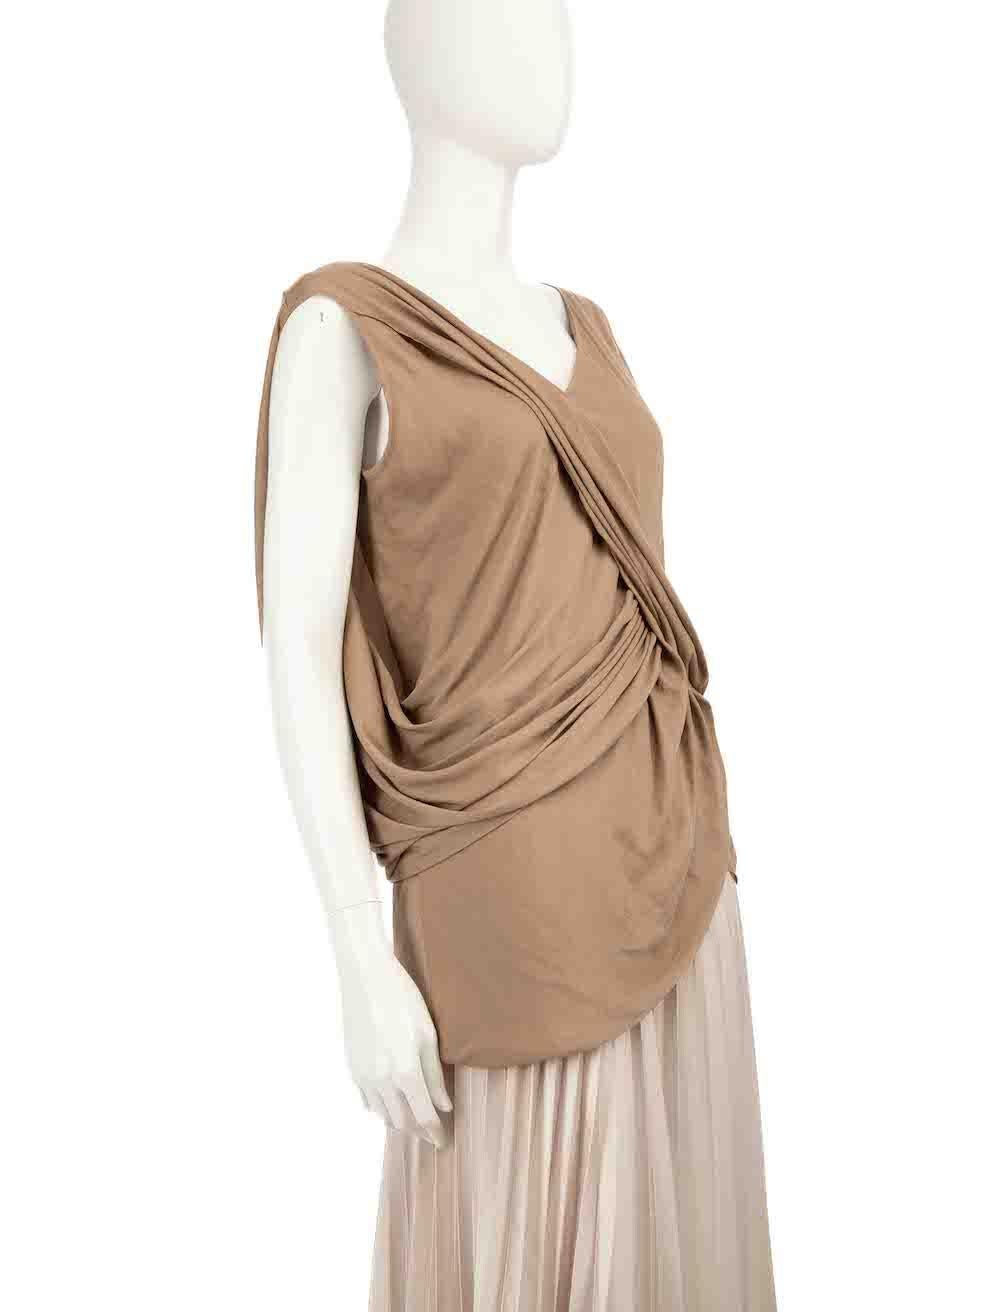 CONDITION is Good. Minor wear to top is evident. Light wear to the front with plucks to the weave on this used Helmut Lang designer resale item.
 
 
 
 Details
 
 
 Brown
 
 Polyester
 
 Top
 
 Sleeveless
 
 Ruched draped detail
 
 V-neck
 
 
 
 
 
